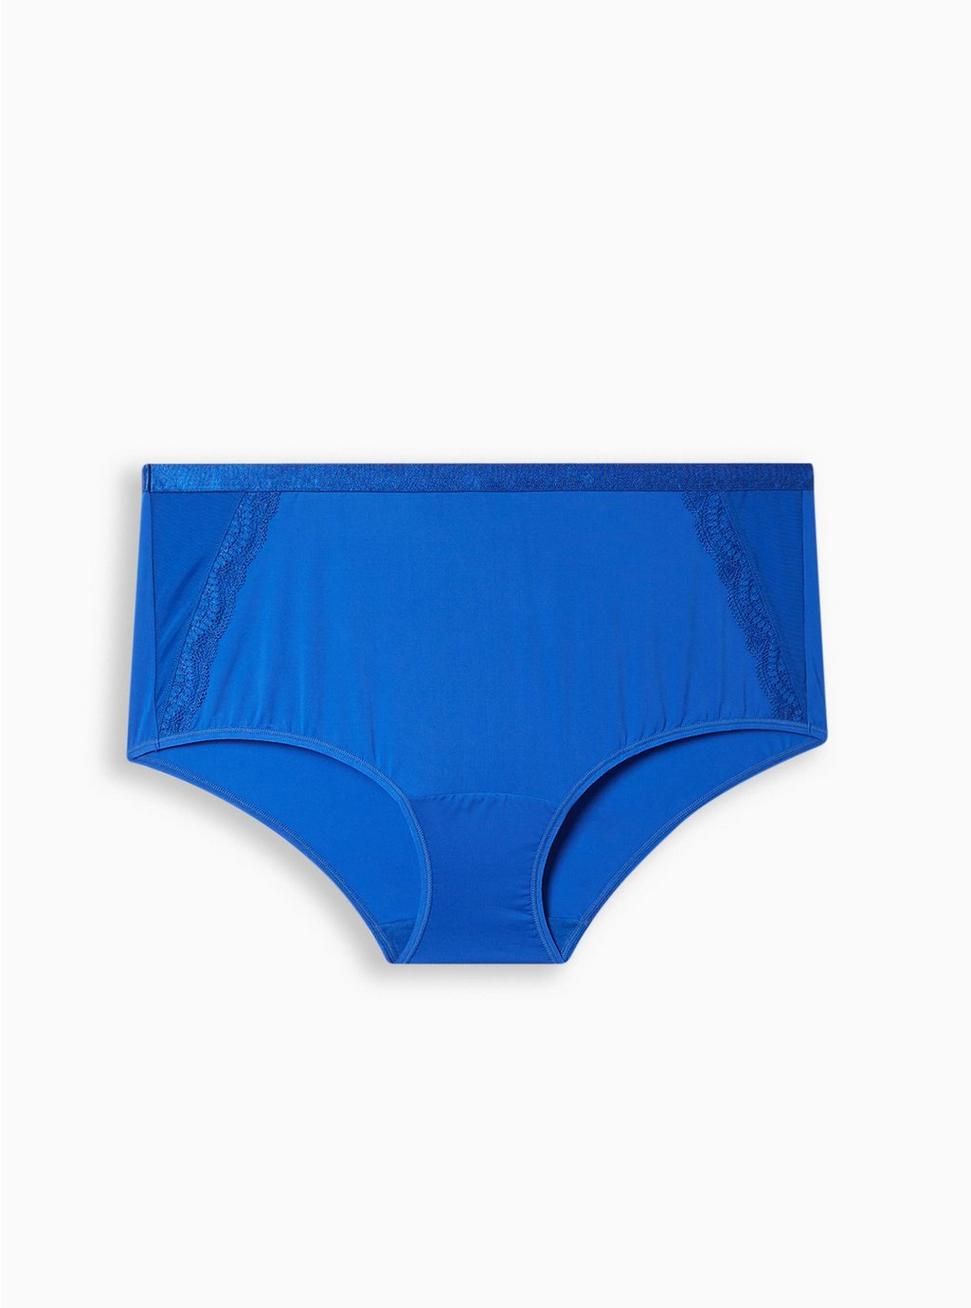 Second Skin Mid-Rise Brief Panty, SURF THE WEB BLUE, hi-res